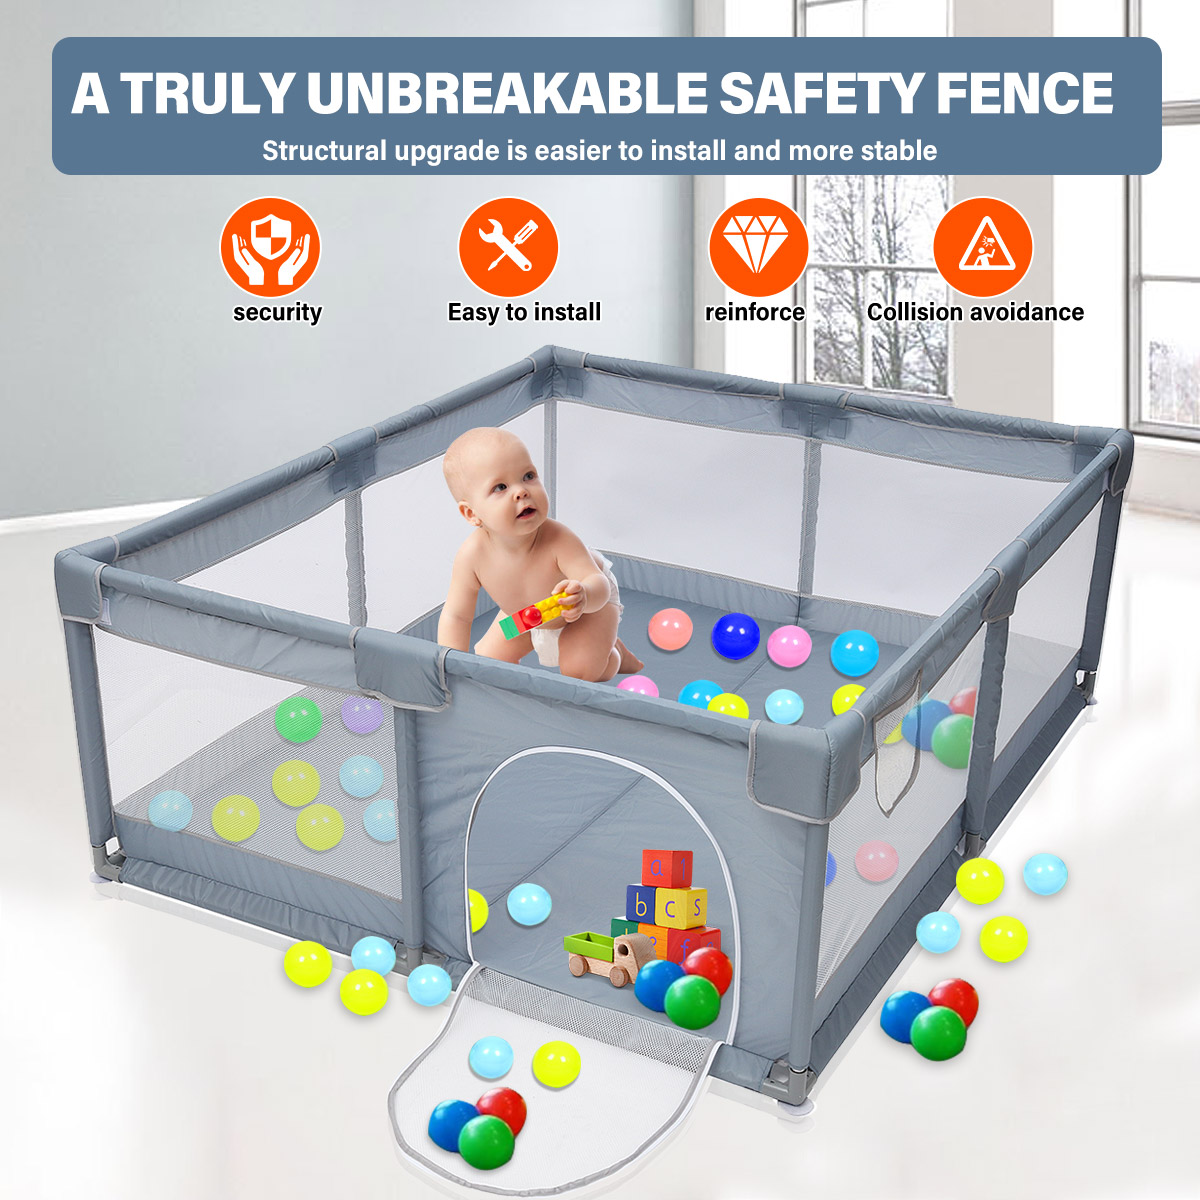 79-Baby-Playpen-Infants-Toddler-Safety-Kids-Packable--Portable-Play-Pens-Activity-Play-Yard-Gate-for-1935215-2